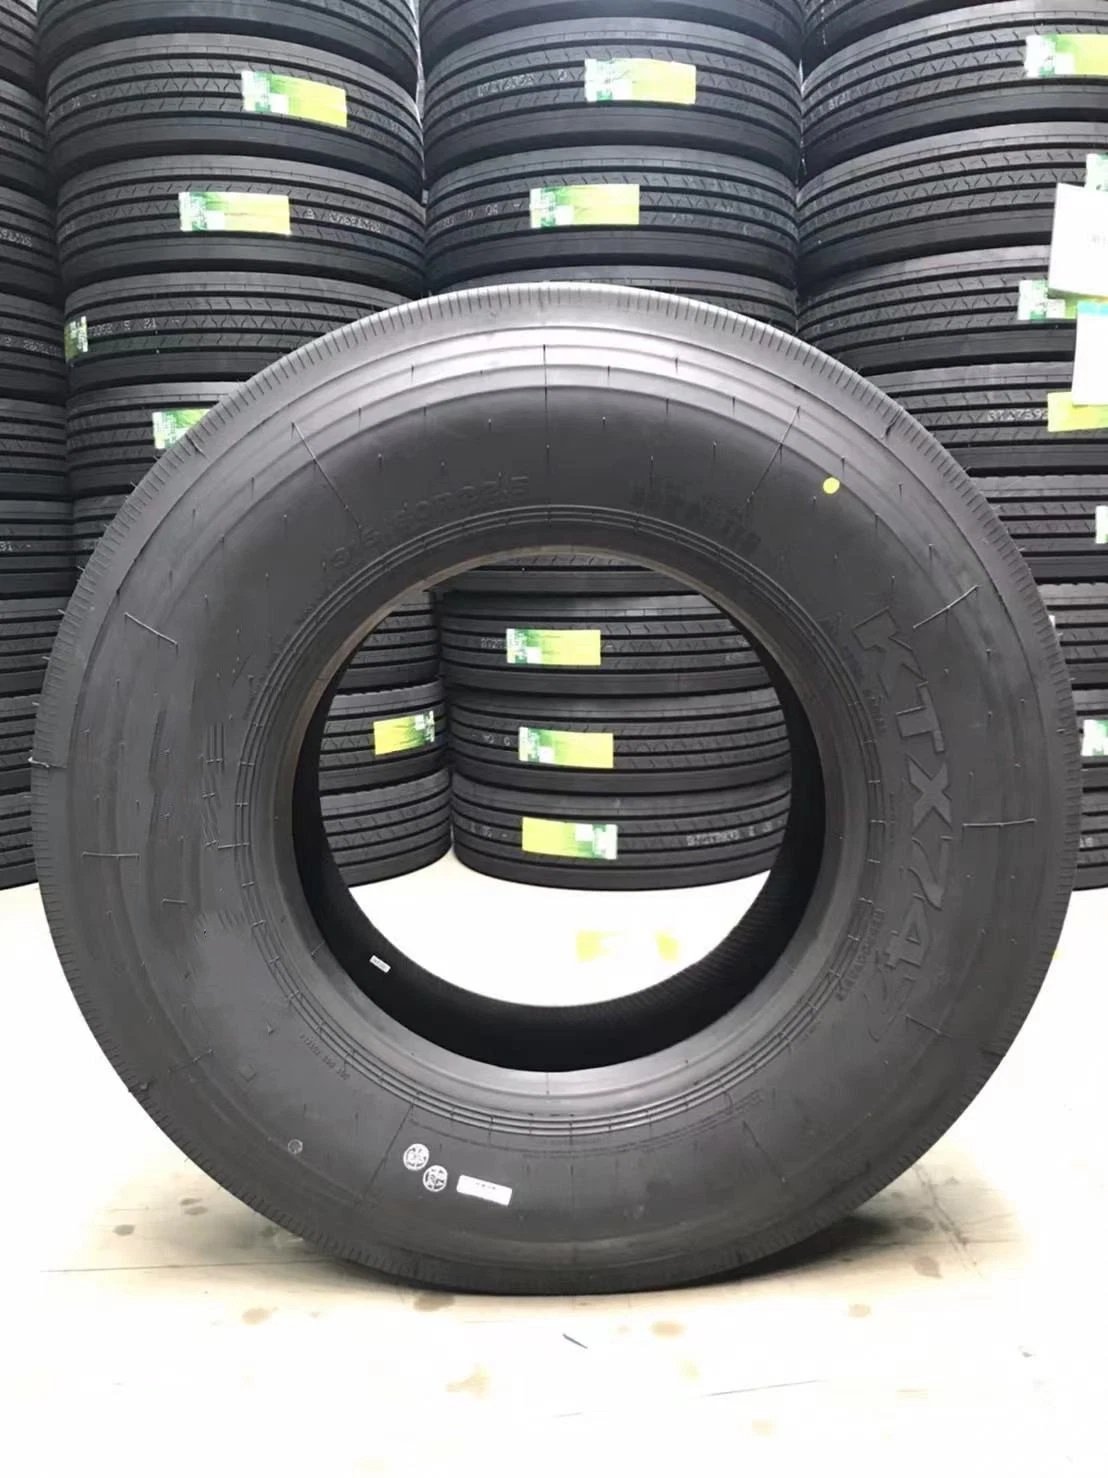 11R22.5 TBR Tire, high quality Truck and bus Tire, Radial Car Tire, Good PRICE from Thailand Factory